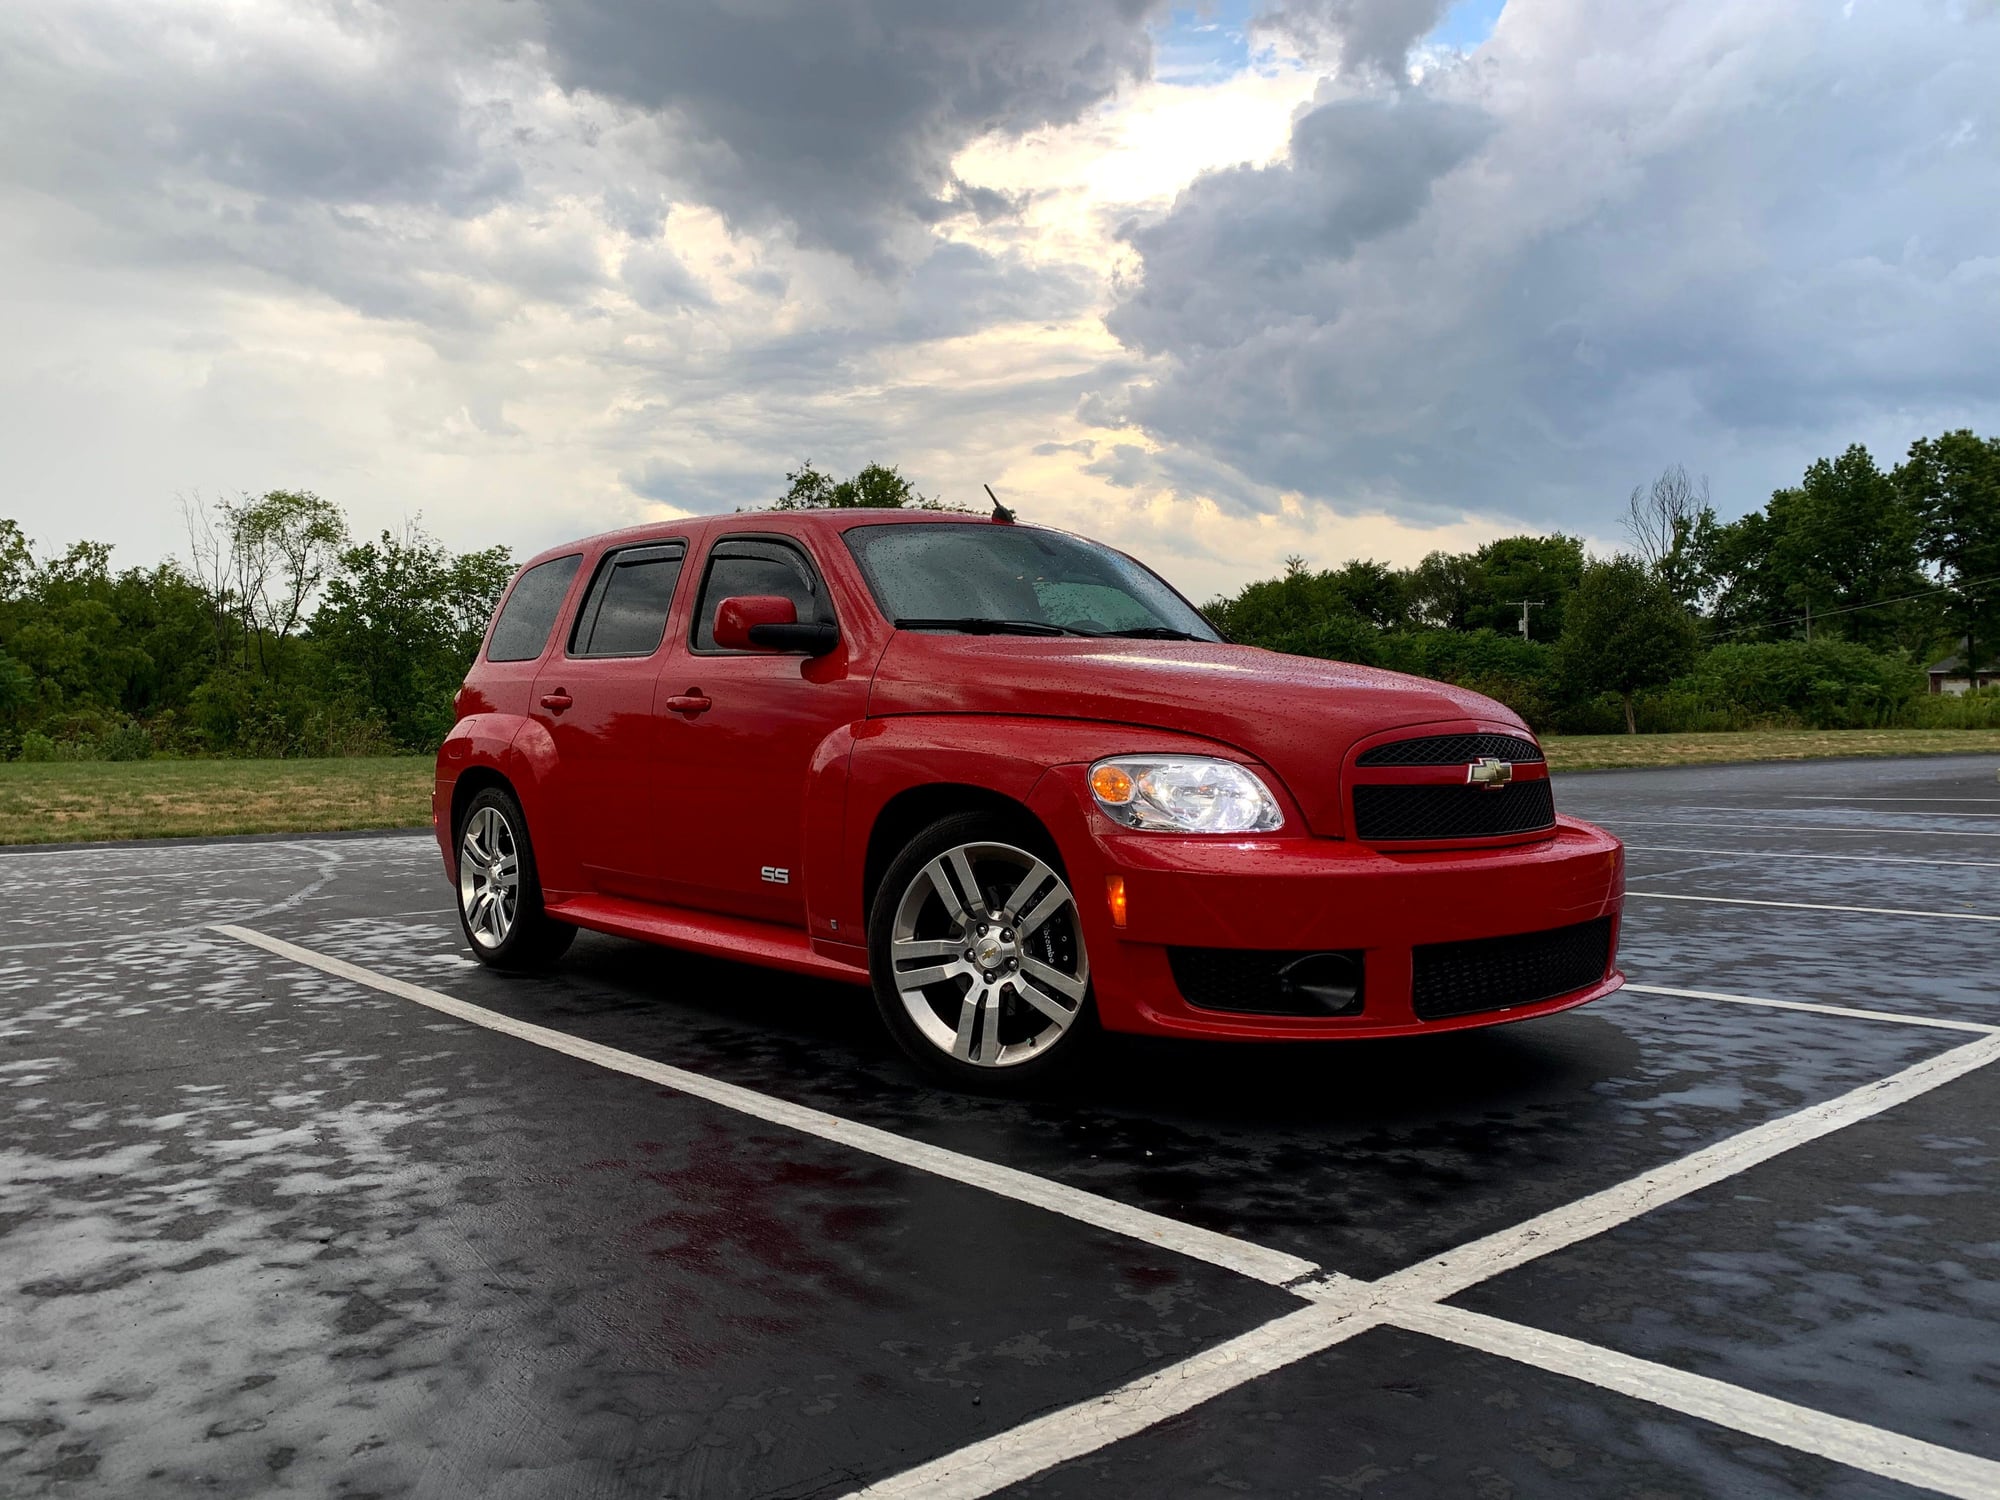 2008 Chevrolet HHR - 2008 Chevrolet HHR SS For Sale - Used - VIN 3GNDA73X88S643465 - 75,407 Miles - 4 cyl - 2WD - Manual - Red - New Castle, PA 16101, United States